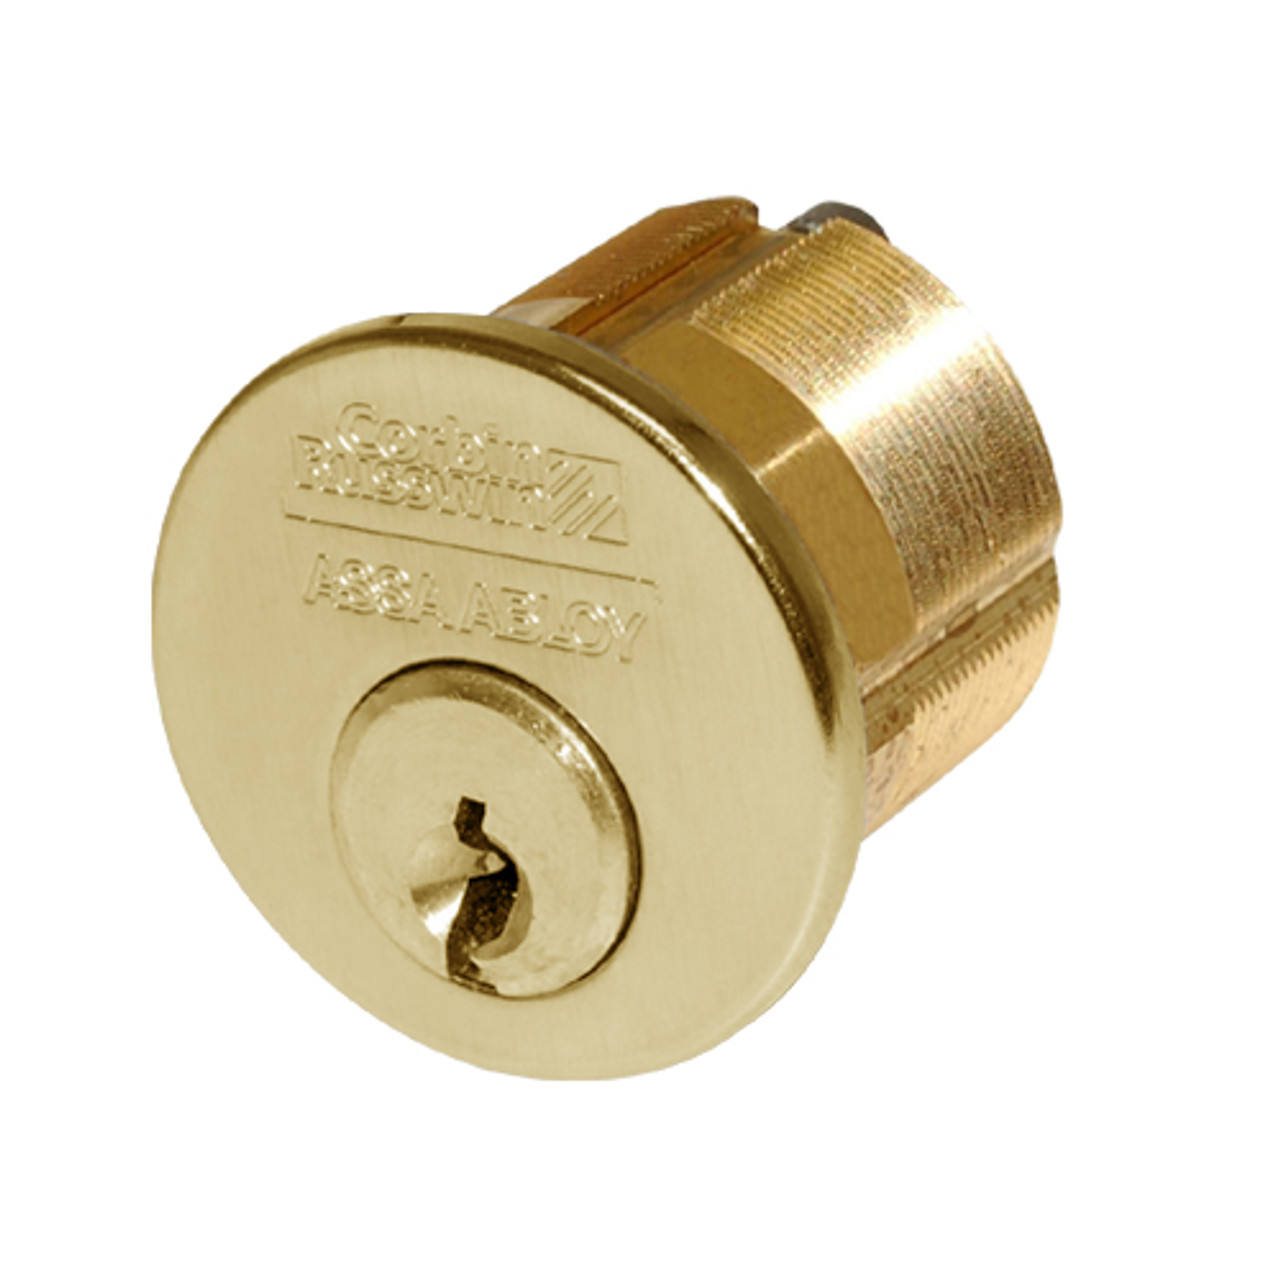 CR1000-118-A01-6-59C1-605 Corbin Conventional Mortise Cylinder for Mortise Lock and DL3000 Deadlocks with Cloverleaf Cam in Bright Brass Finish